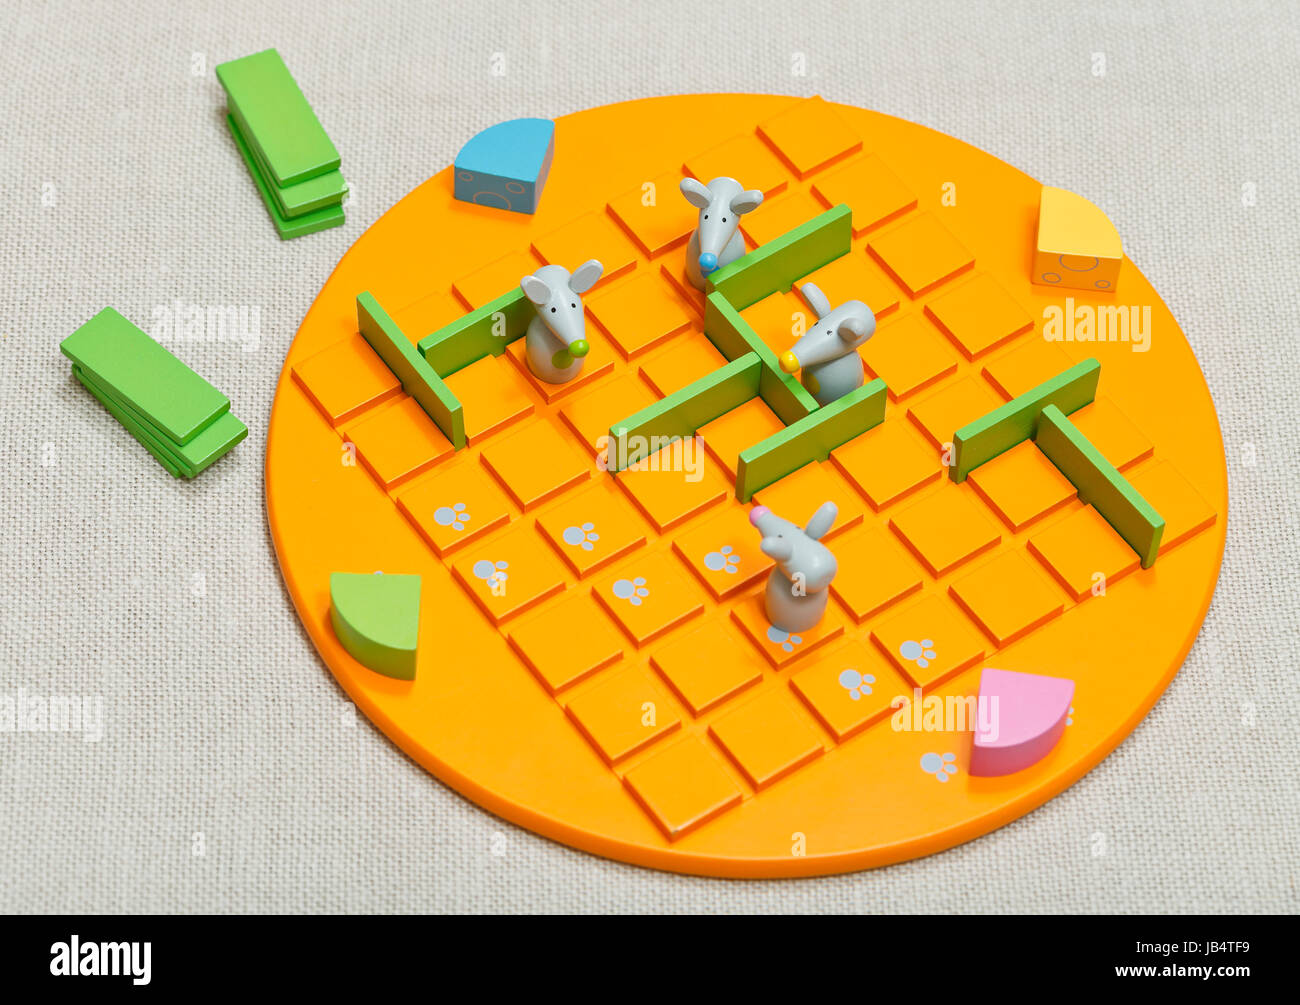 MOSCOW, RUSSIA - FEBRUARY 3, 2014: view of board game Quoridor Kid. Quoridor game was designed by Mirko Marchesi, received Mensa Mind Game award in 1997, it was Game Of The Year in USA, France, Canada Stock Photo